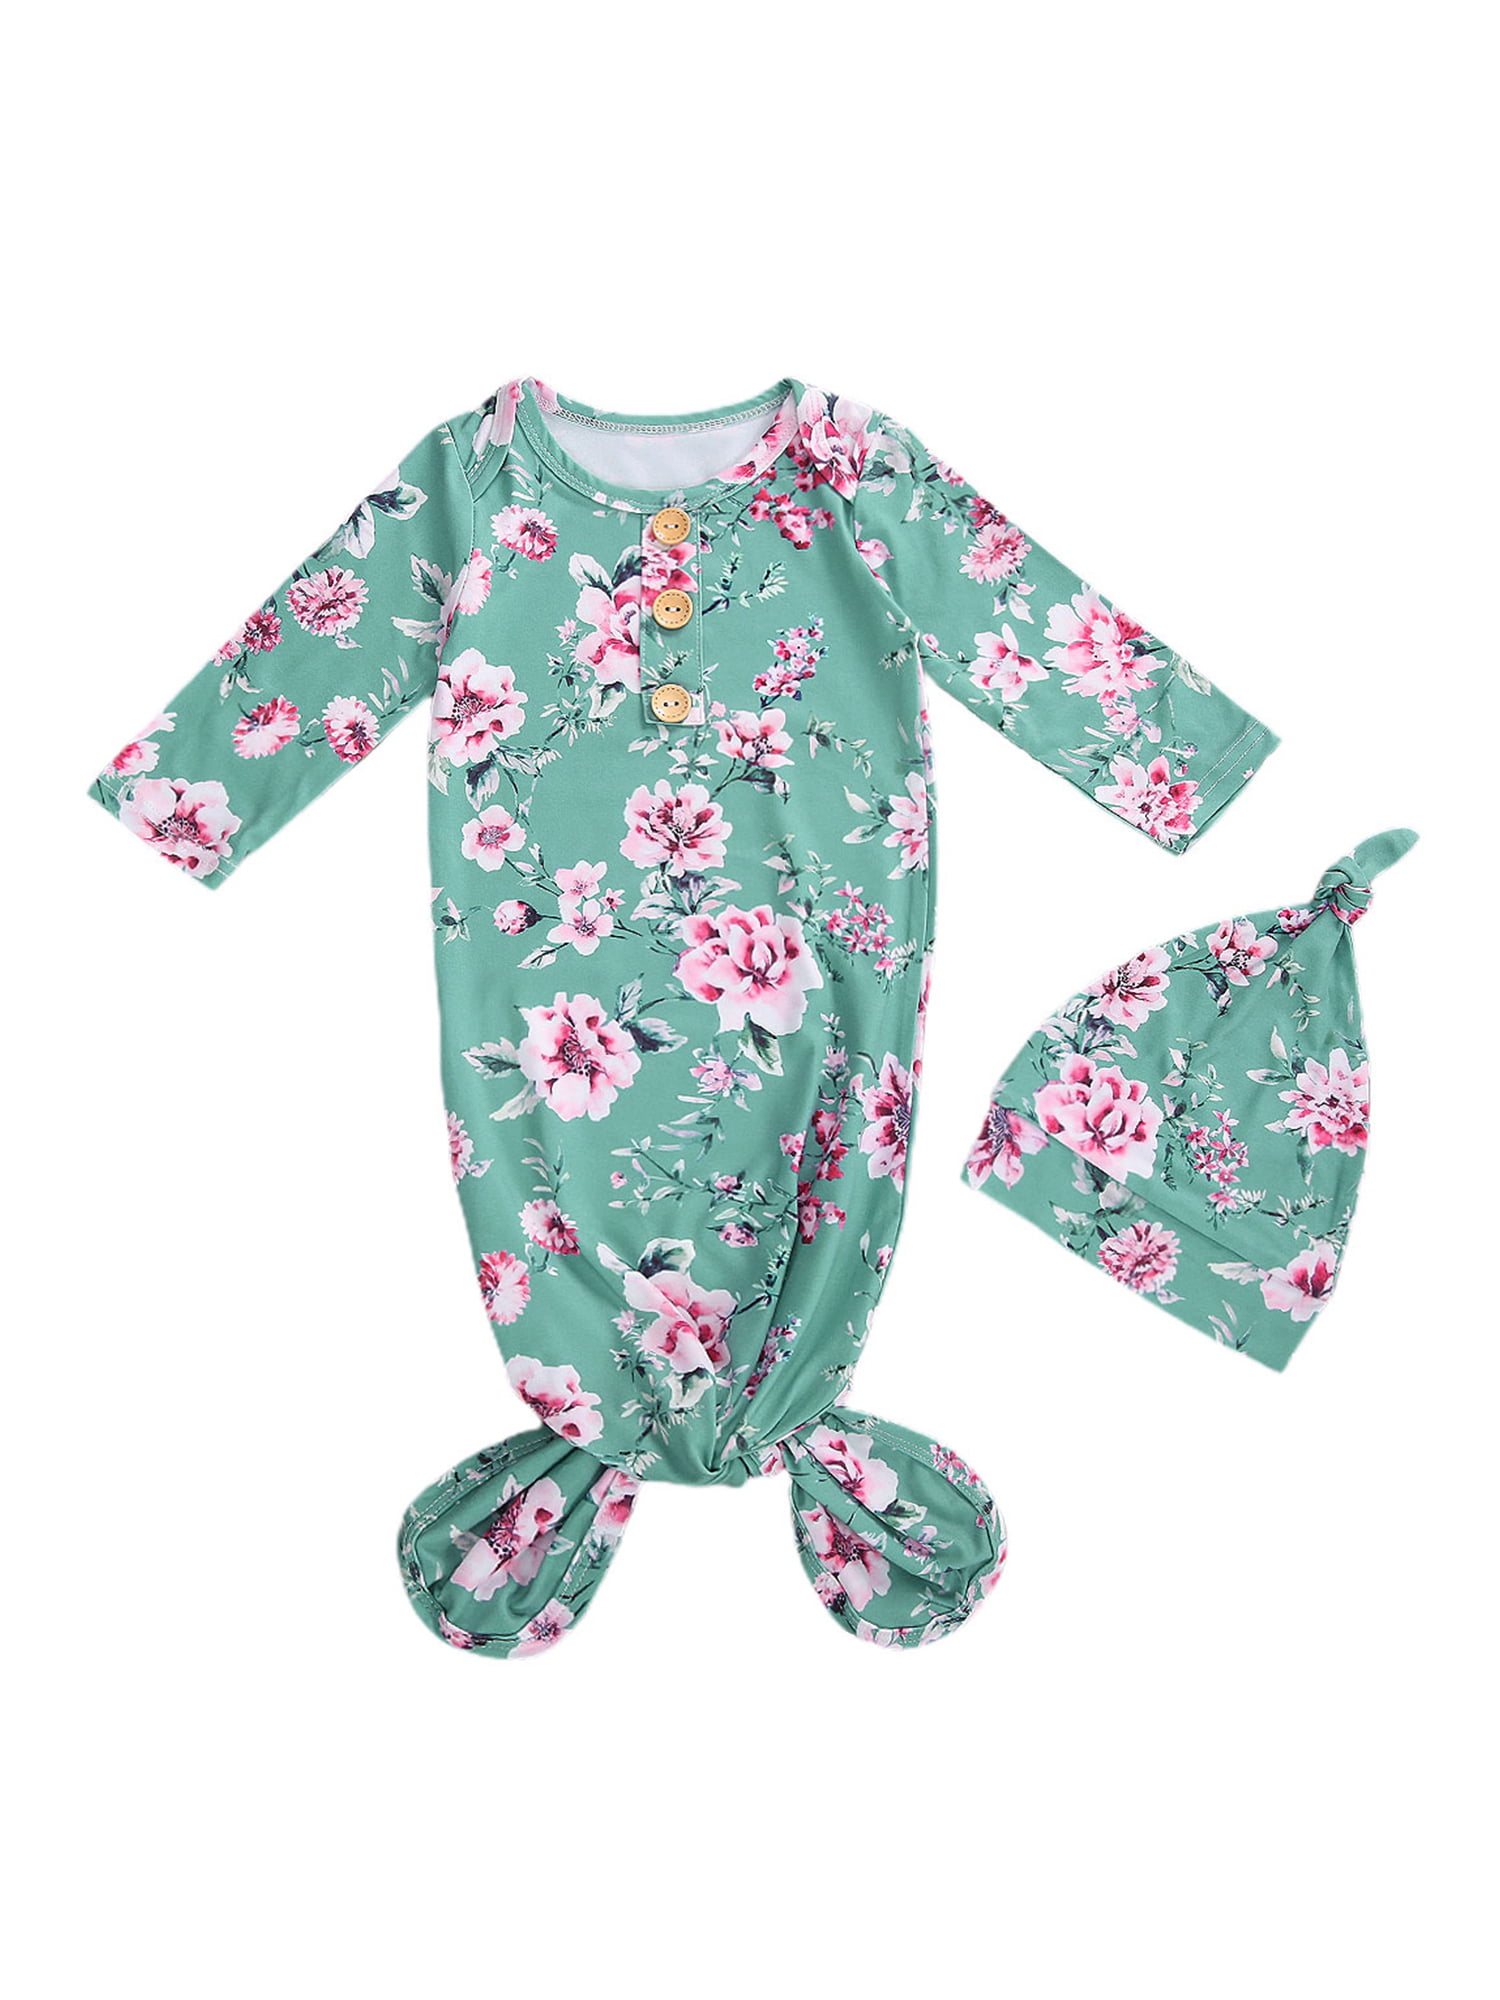 Newborn Baby Girl Floral Nightgowns with Headband Sleeper Gown Take Home Outfit 